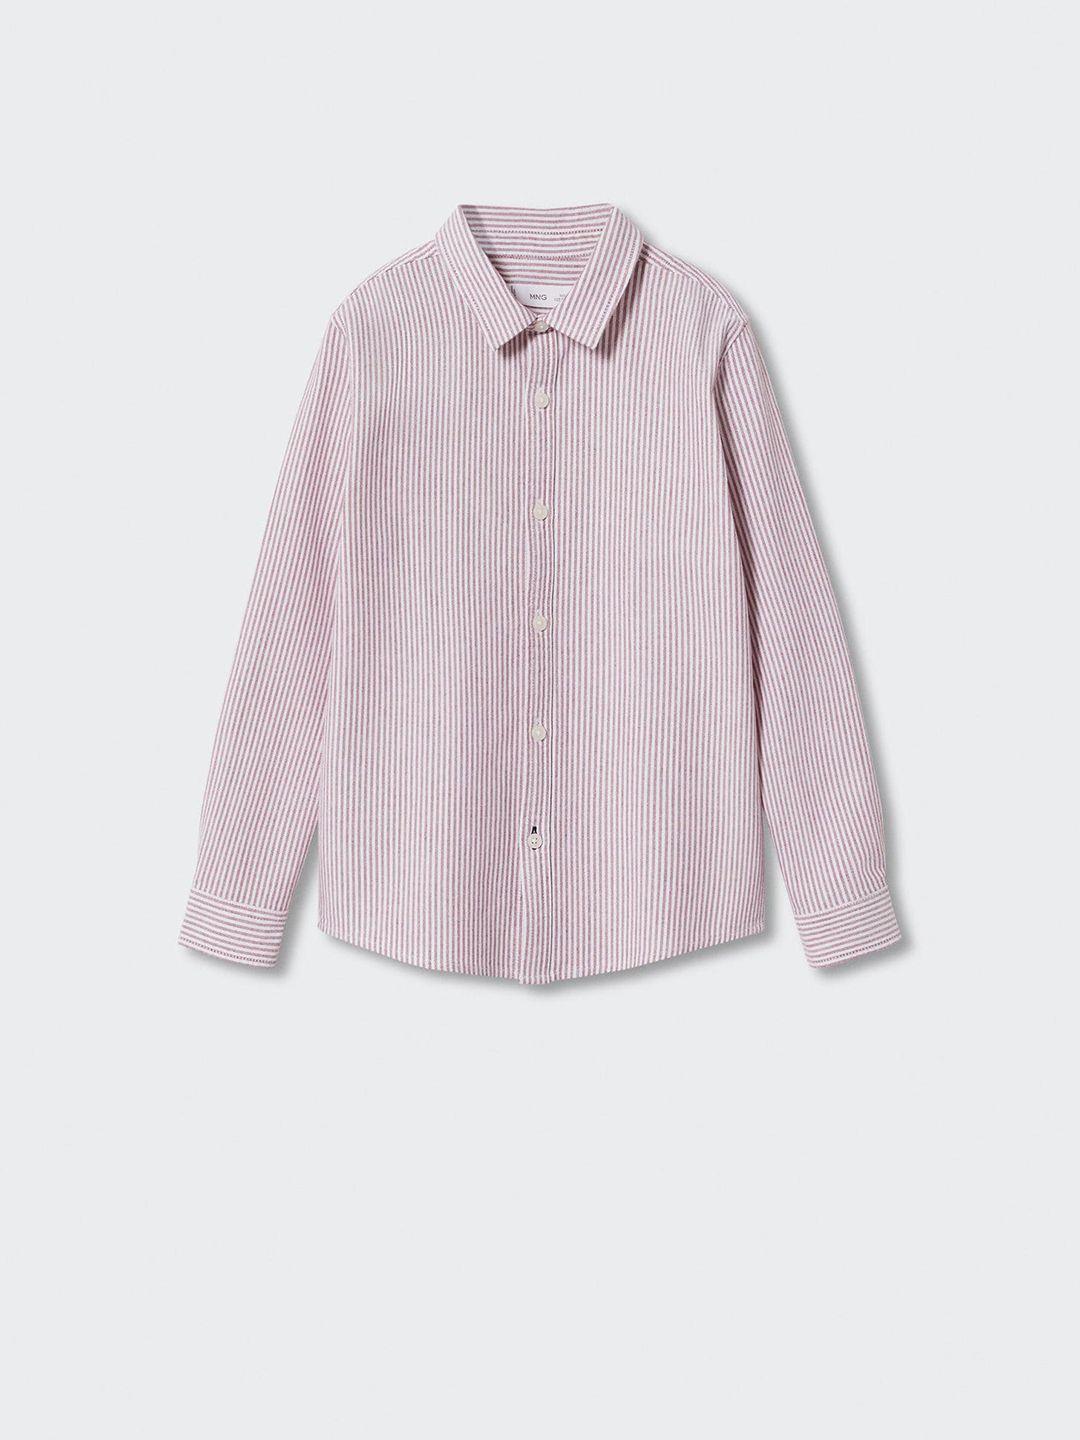 mango-kids-boys-vertically-striped-pure-cotton-oxford-sustainable-casual-shirt